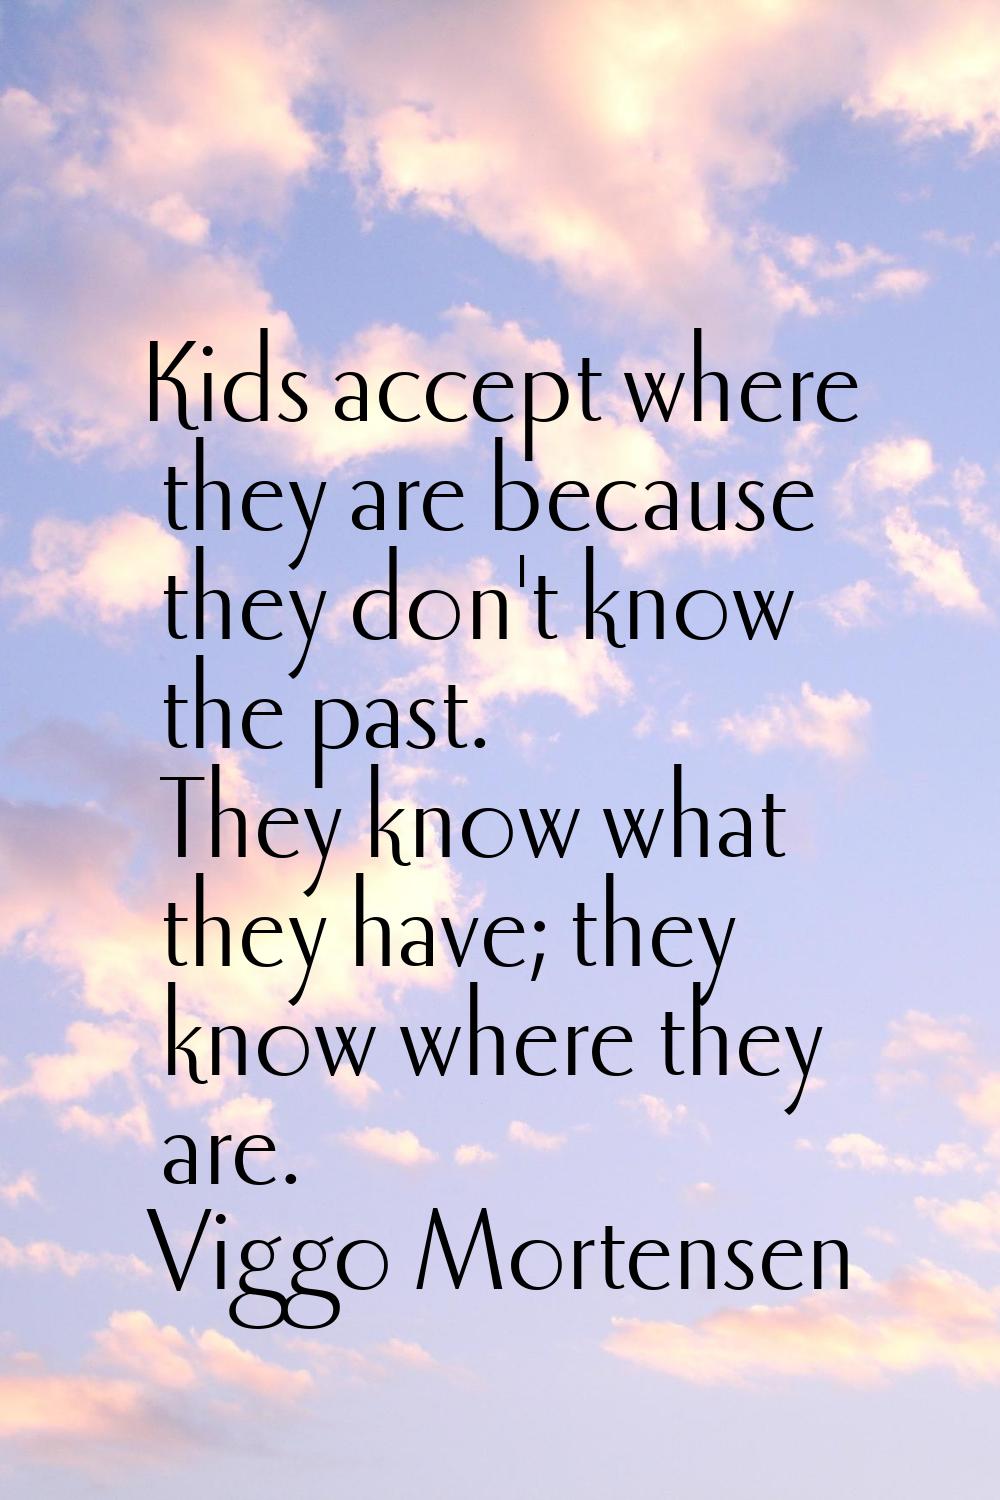 Kids accept where they are because they don't know the past. They know what they have; they know wh